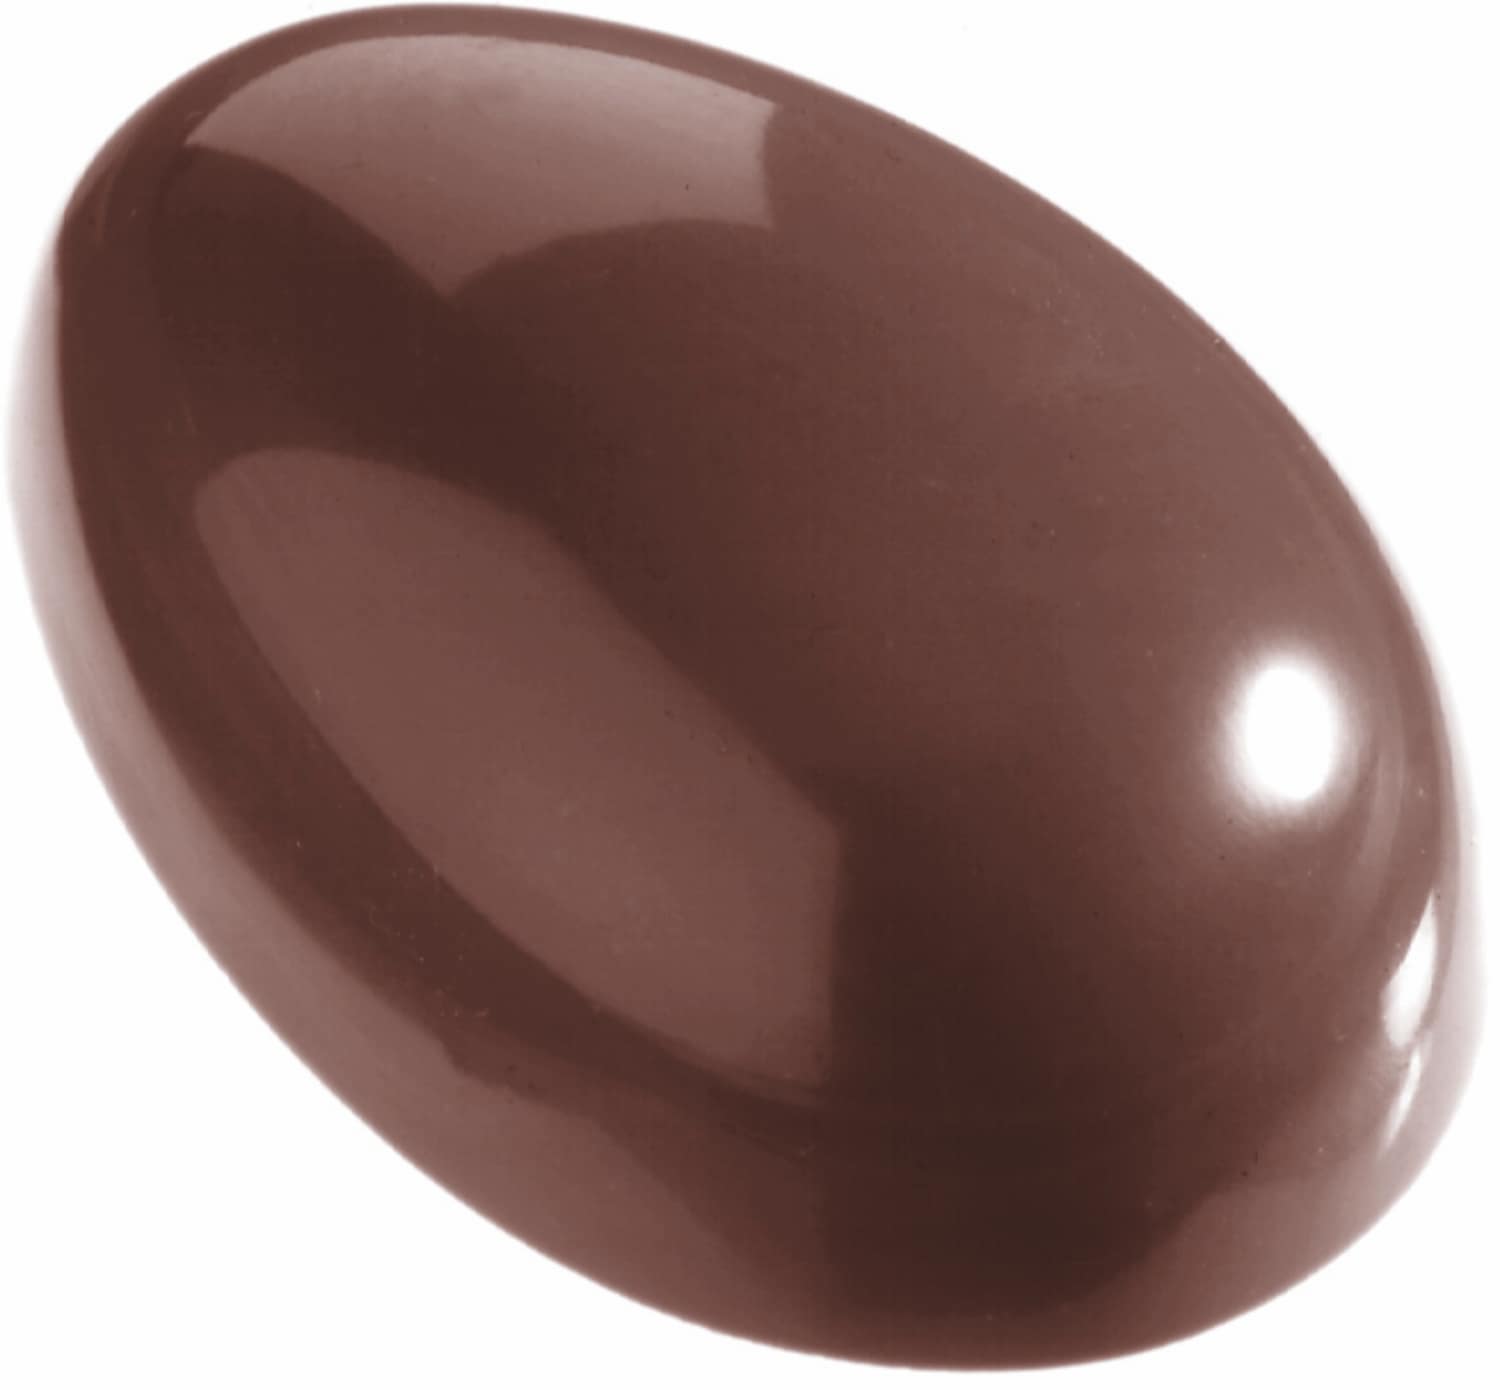 Chocolate mould "Easter egg" 421252